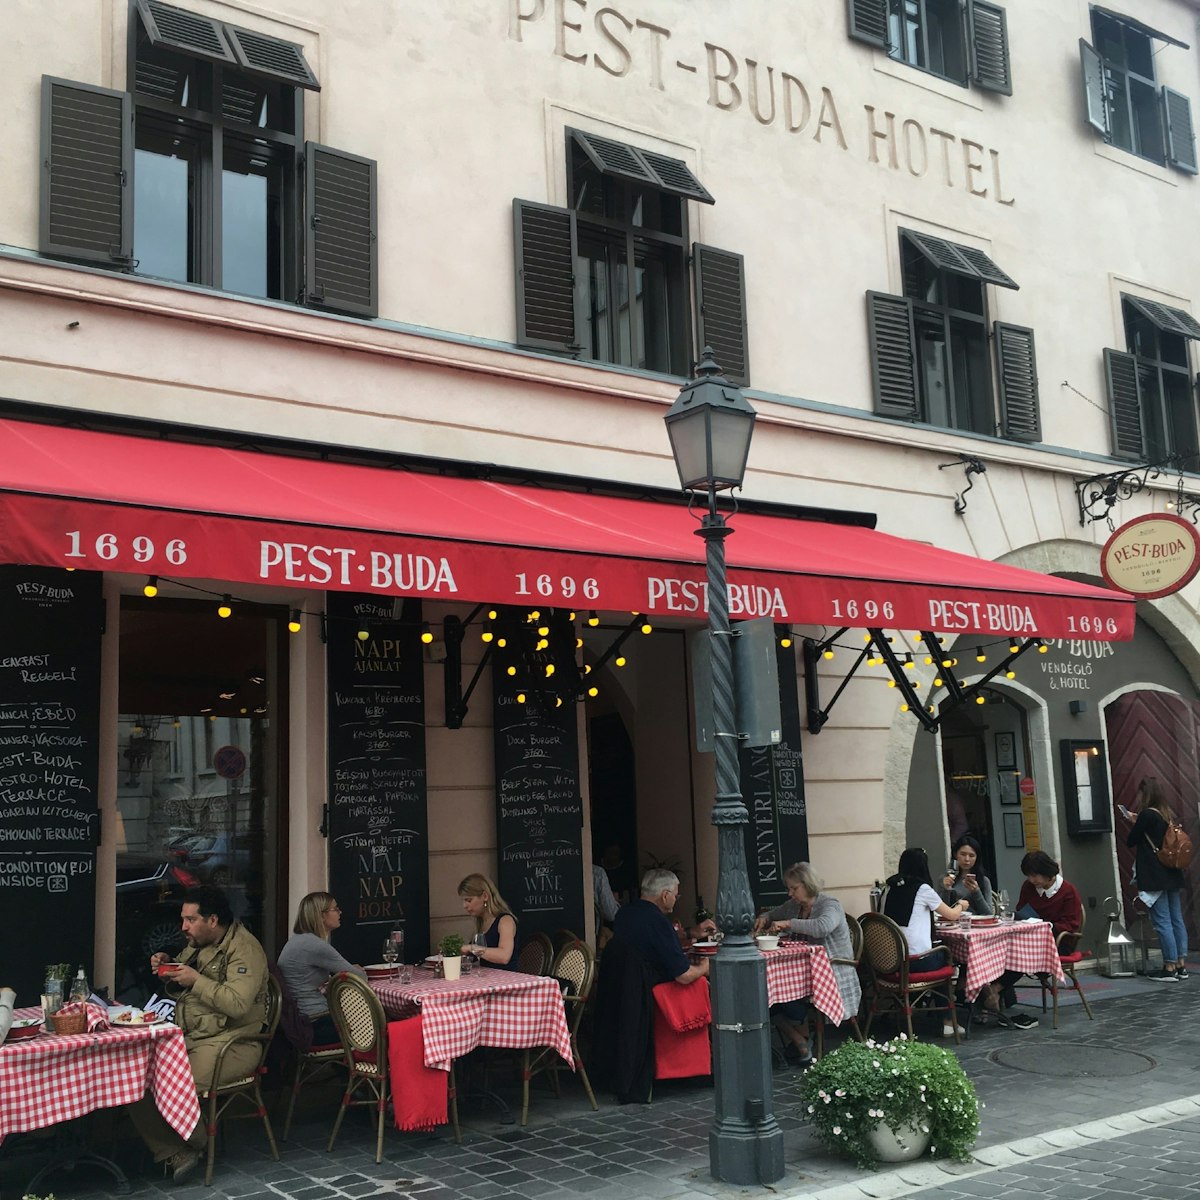 The Pest-Buda boutique hotel and bistro